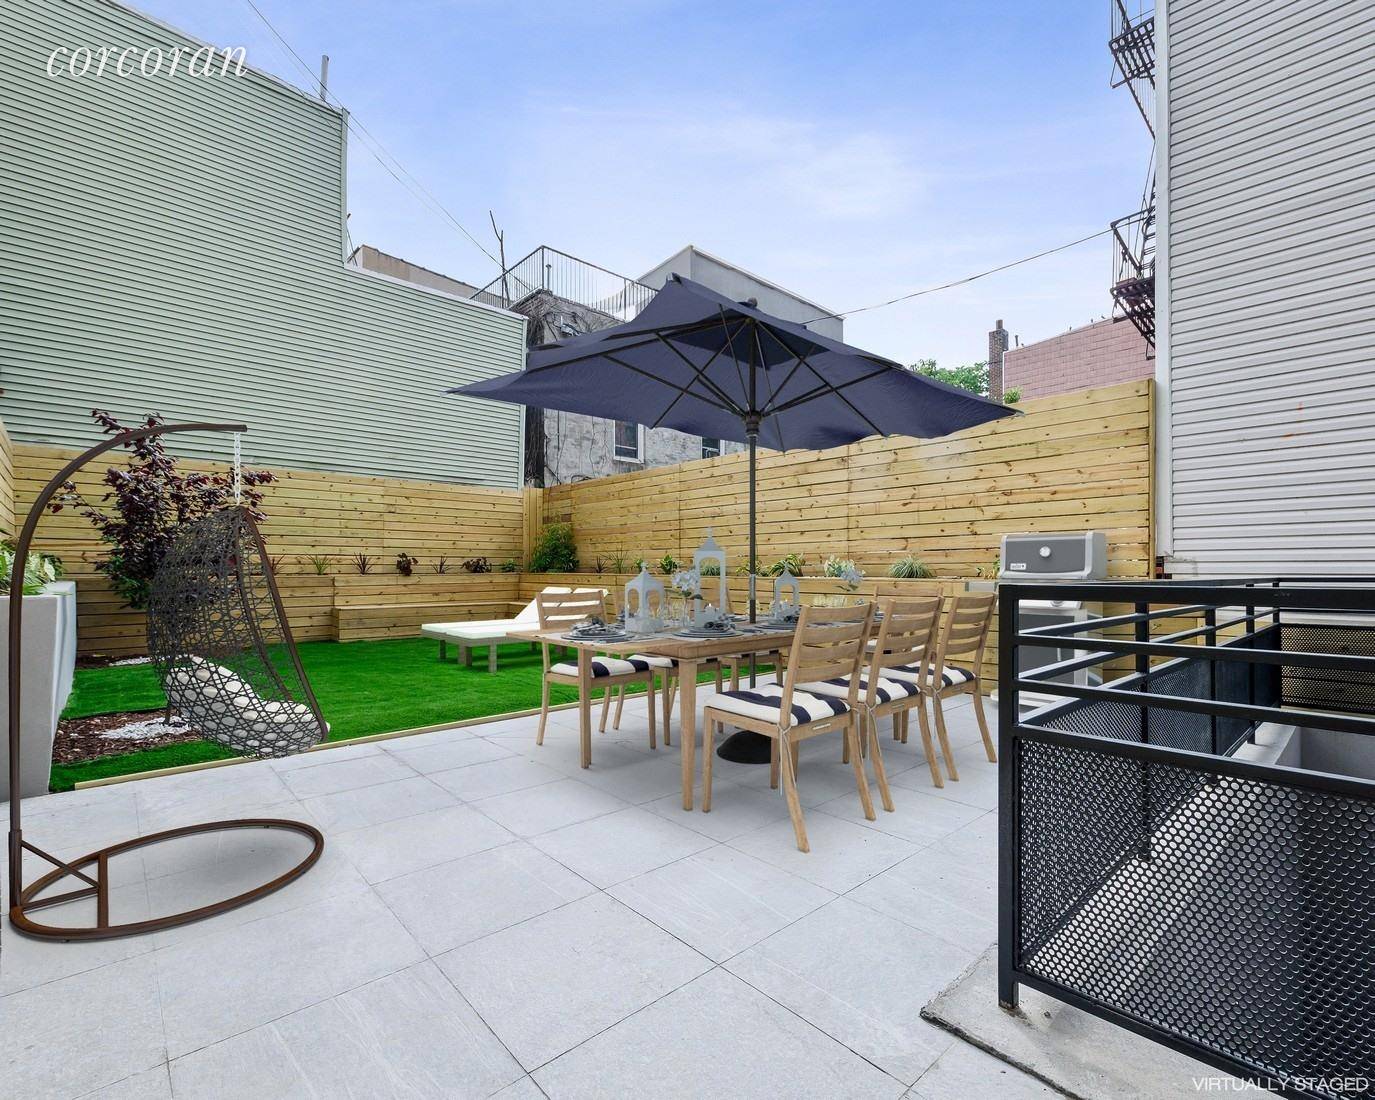 168 Evergreen is an 8 unit condominium, an architectural gem masterfully designed to reflect the artistic flair of this fashionable Bushwick neighborhood with its unequaled quality construction, refined finishes and ...